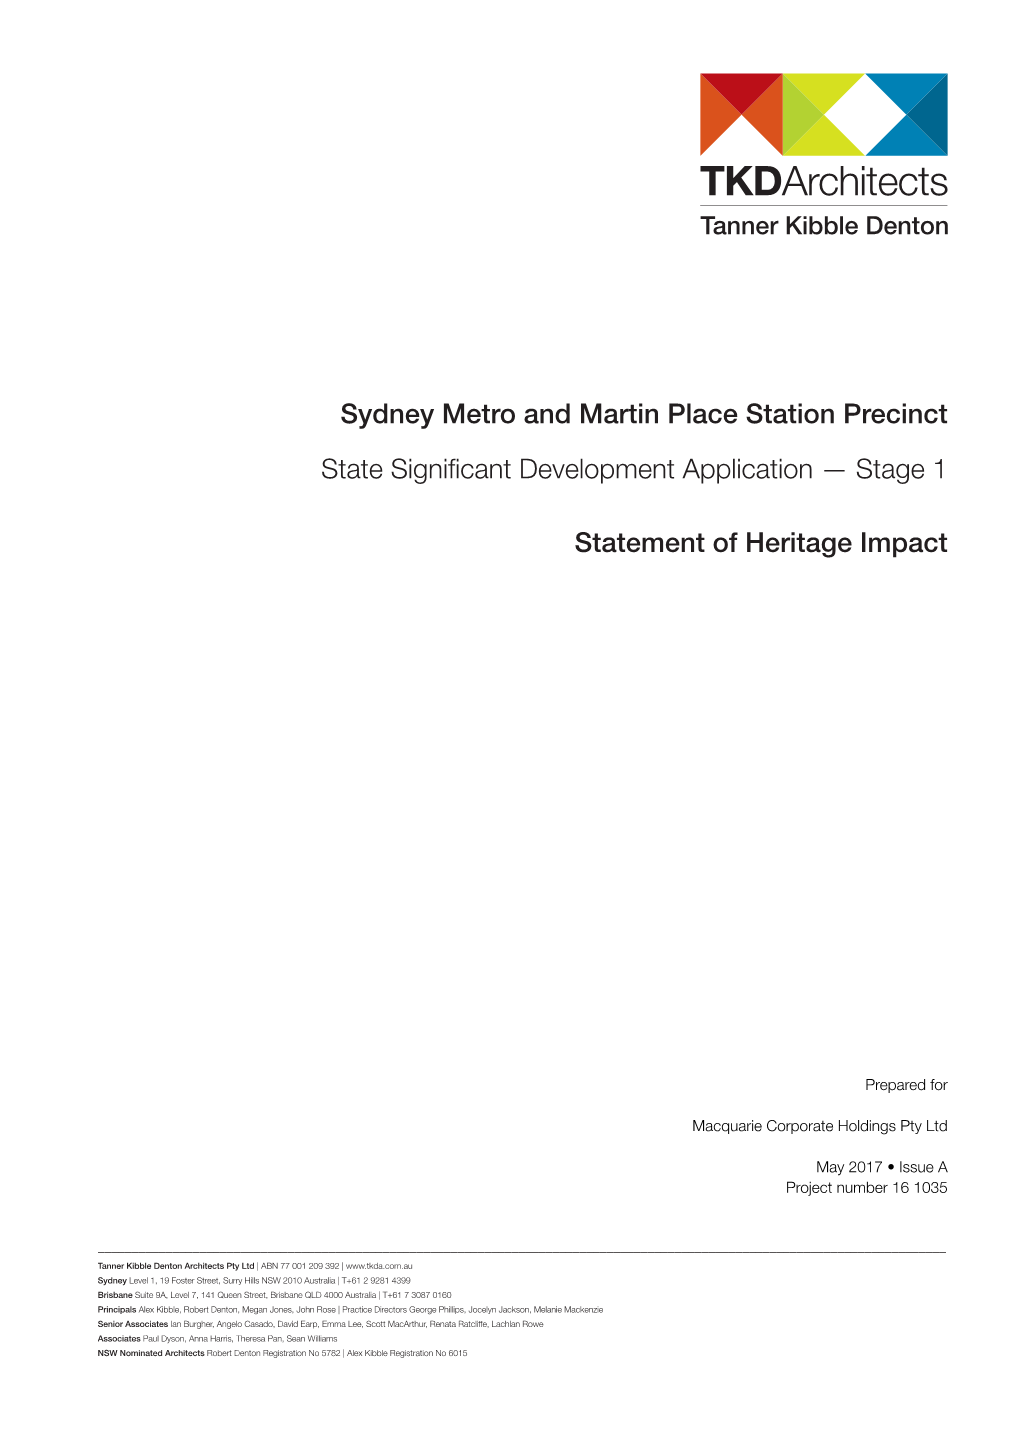 Sydney Metro and Martin Place Station Precinct State Significant